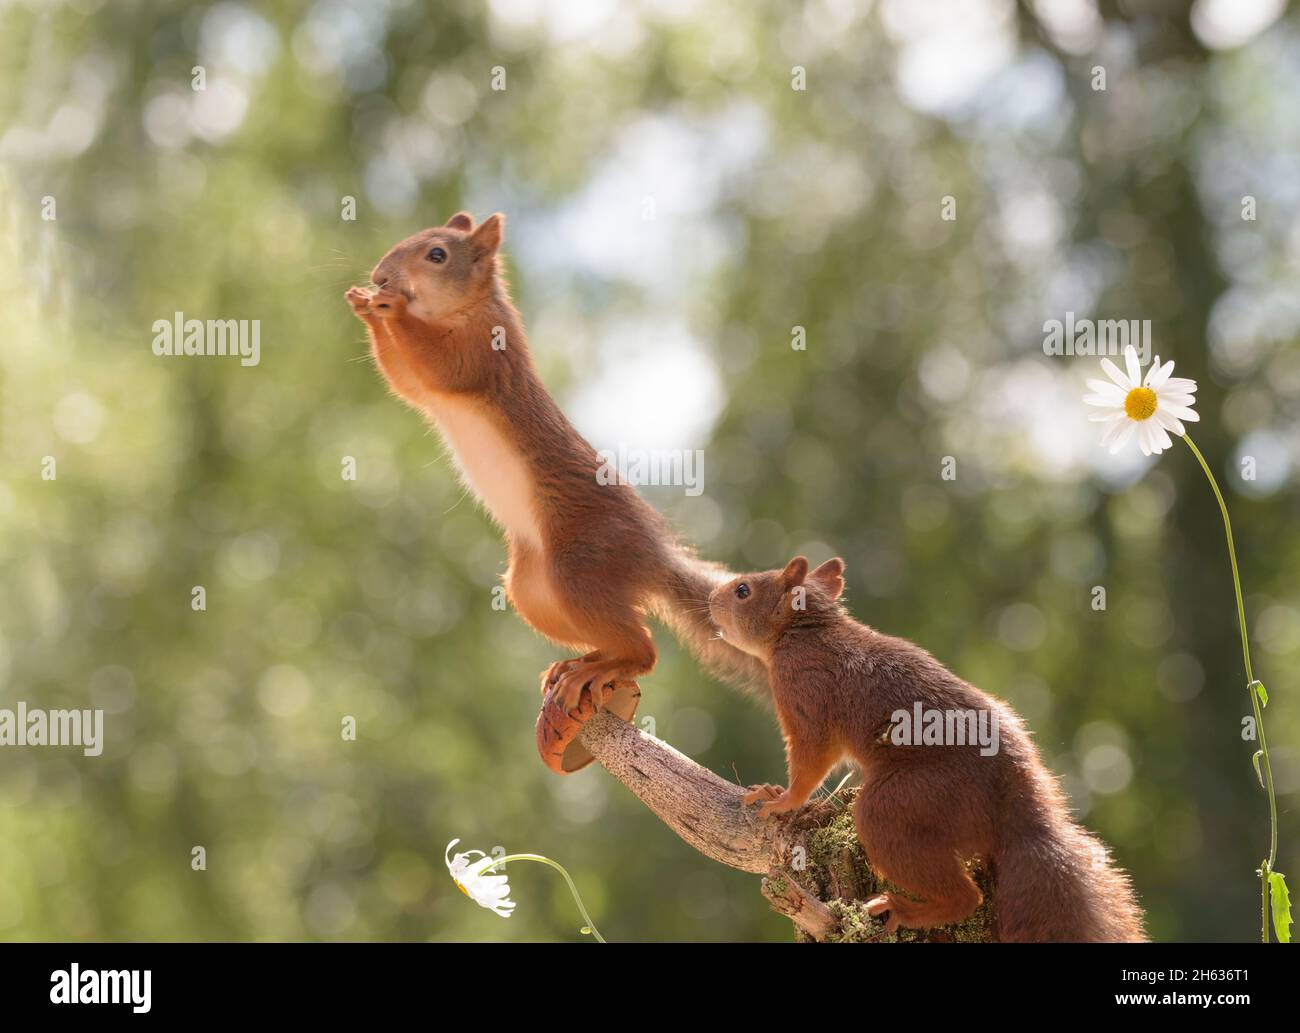 red squirrel on mushroom with daisy flowers another squirrel watching Stock Photo